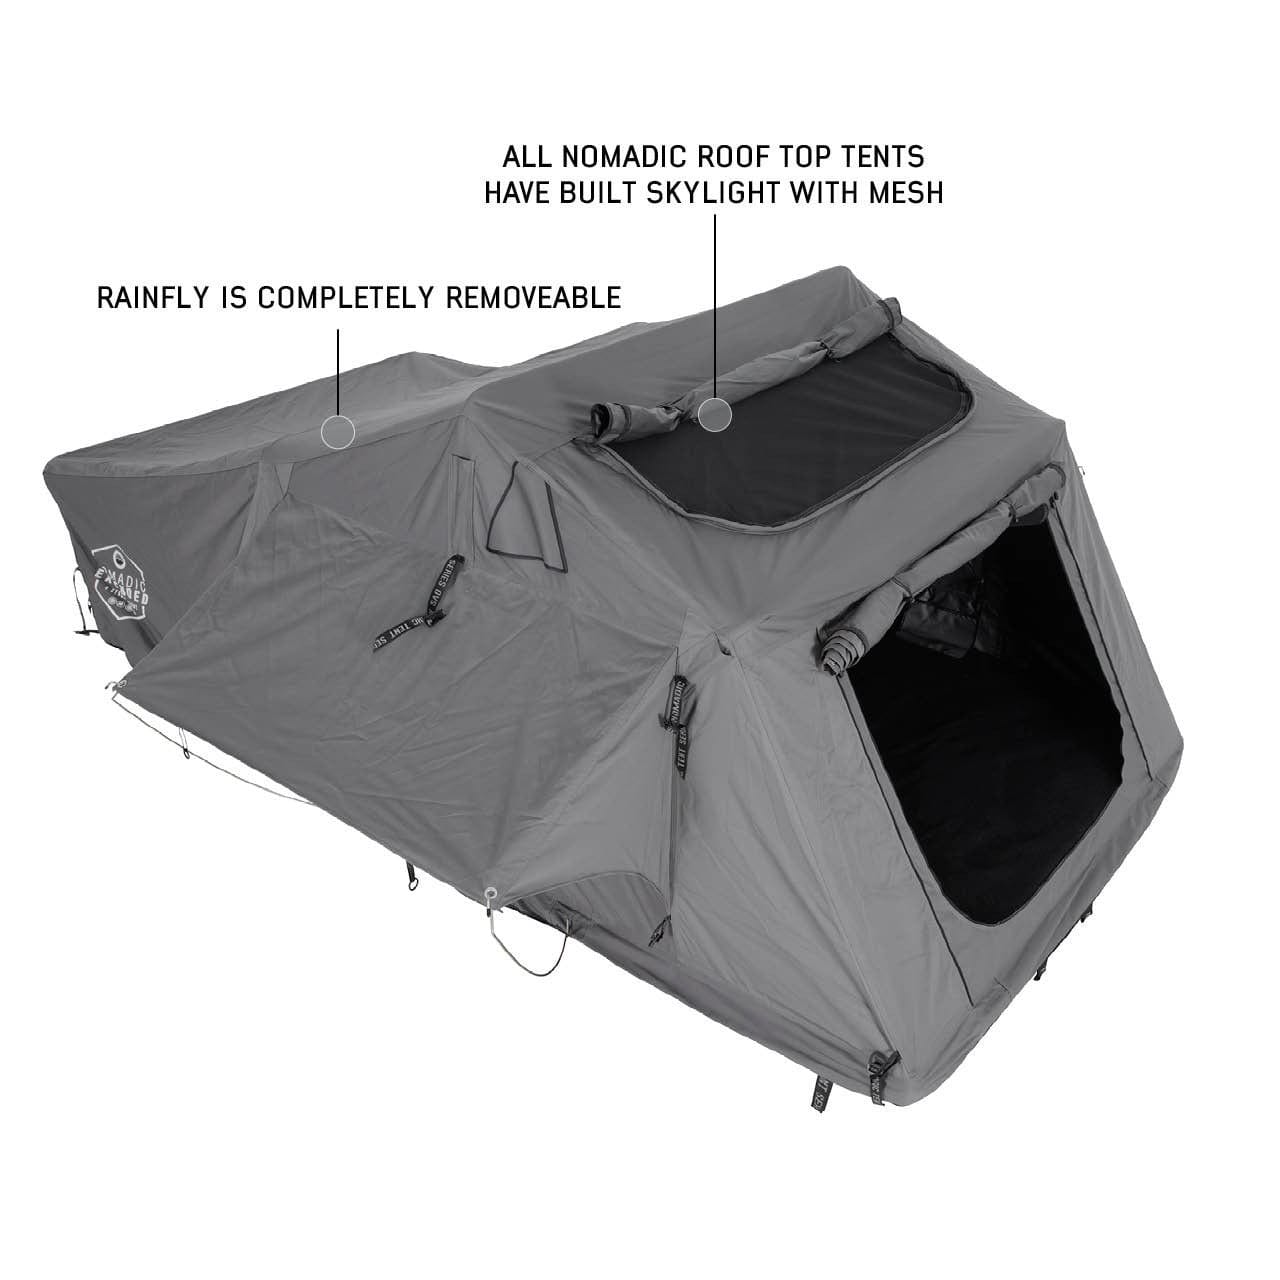 Nomadic 4 Extended Rooftop Tent Rooftop Tent Overland Vehicle Systems   